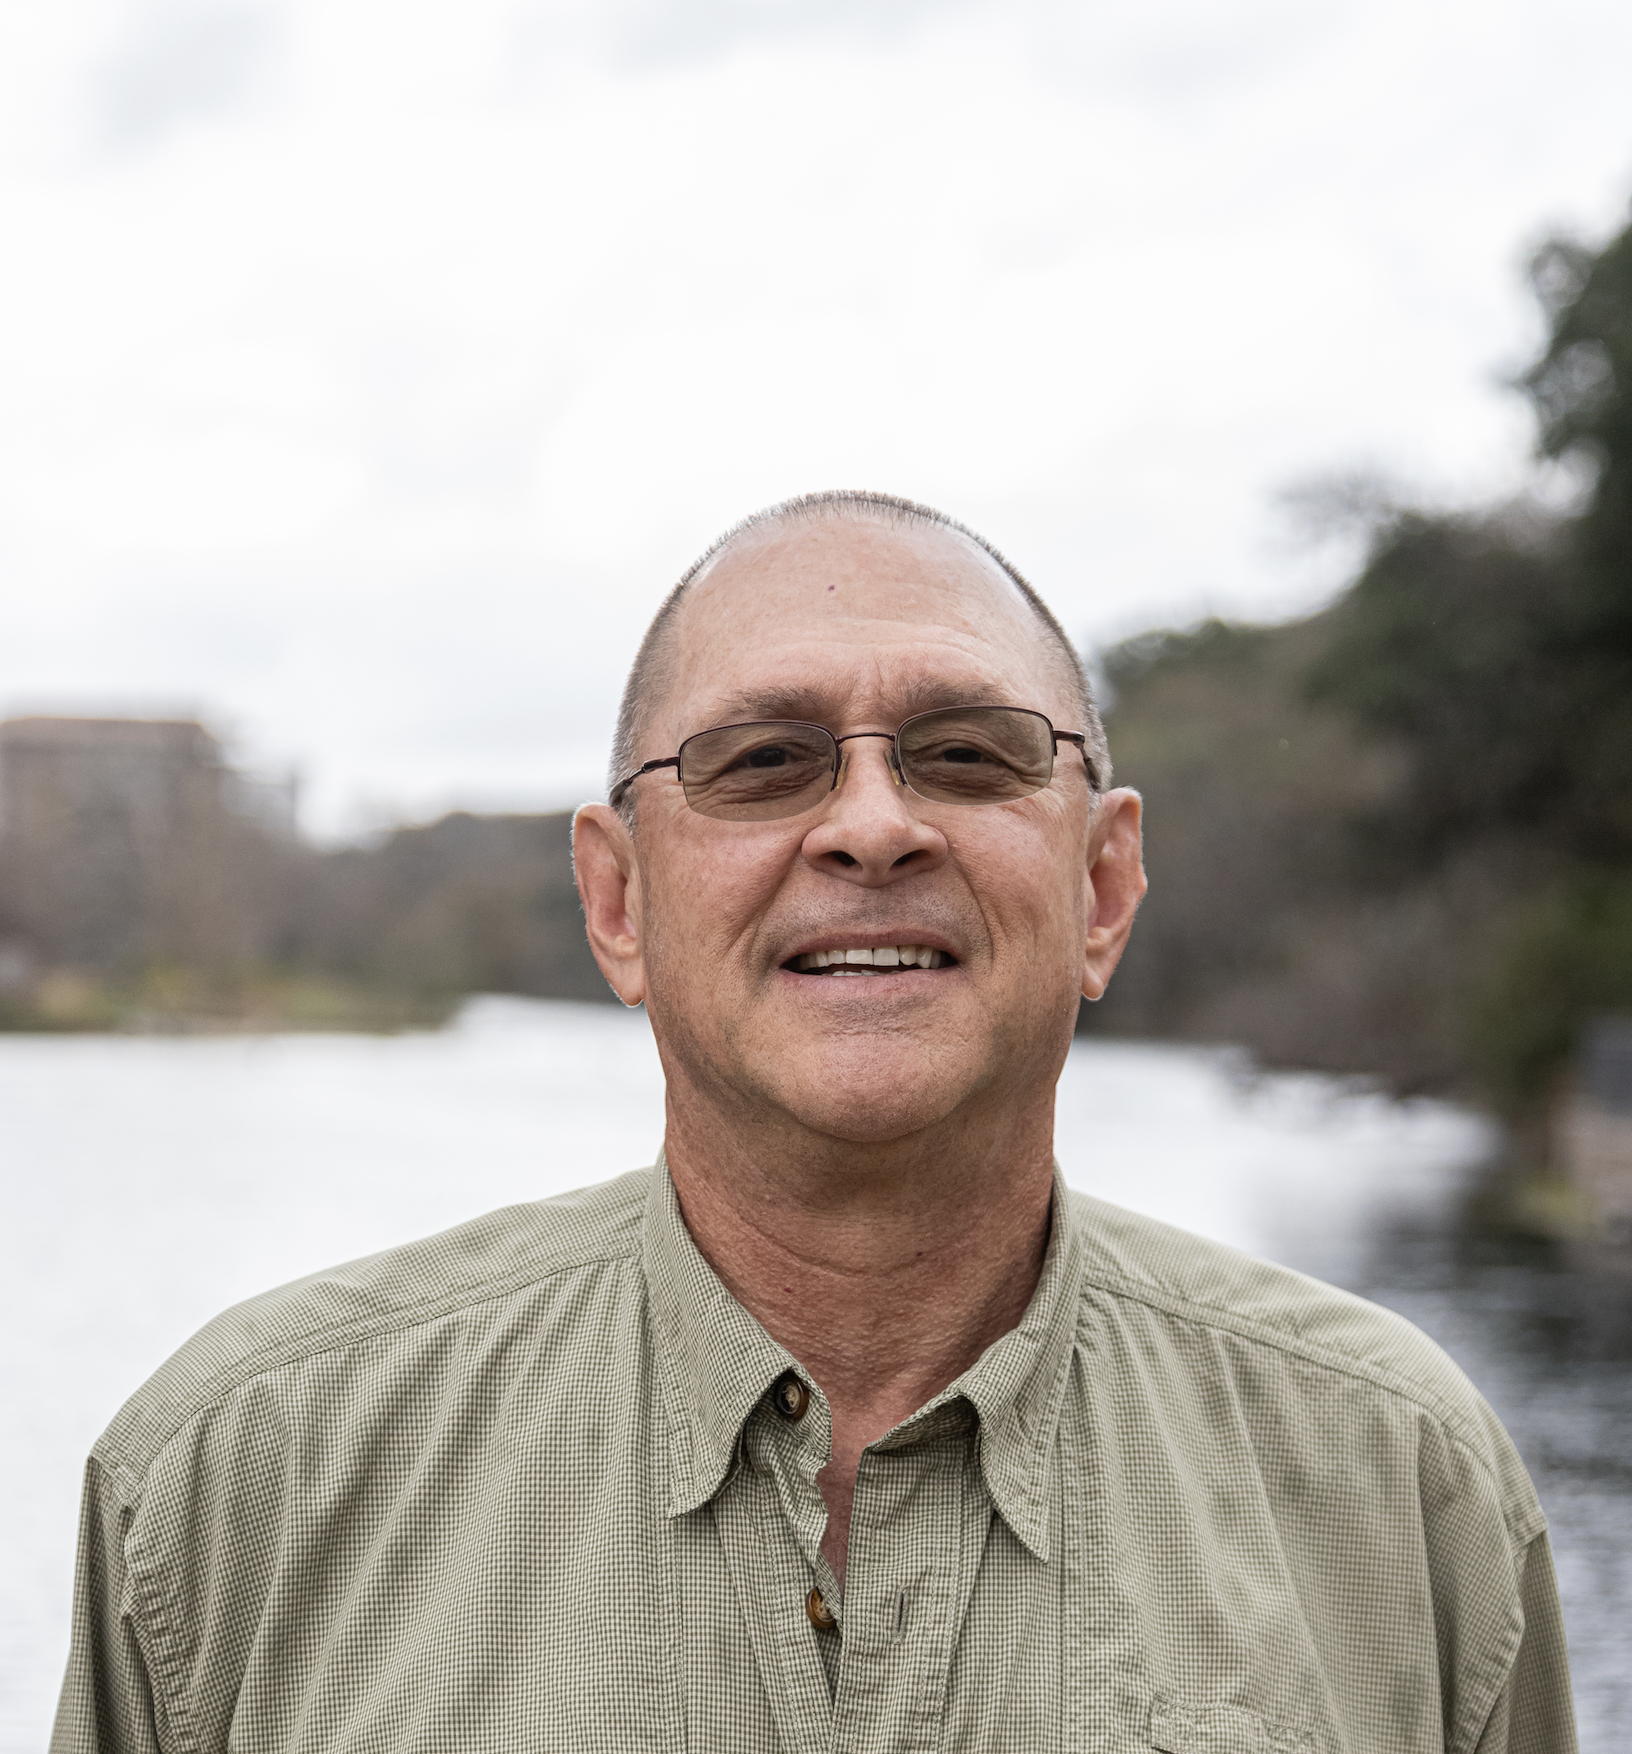 Headshot of Mike Bira, long-time supporter of the Texas Stream Team program and former EPA employee